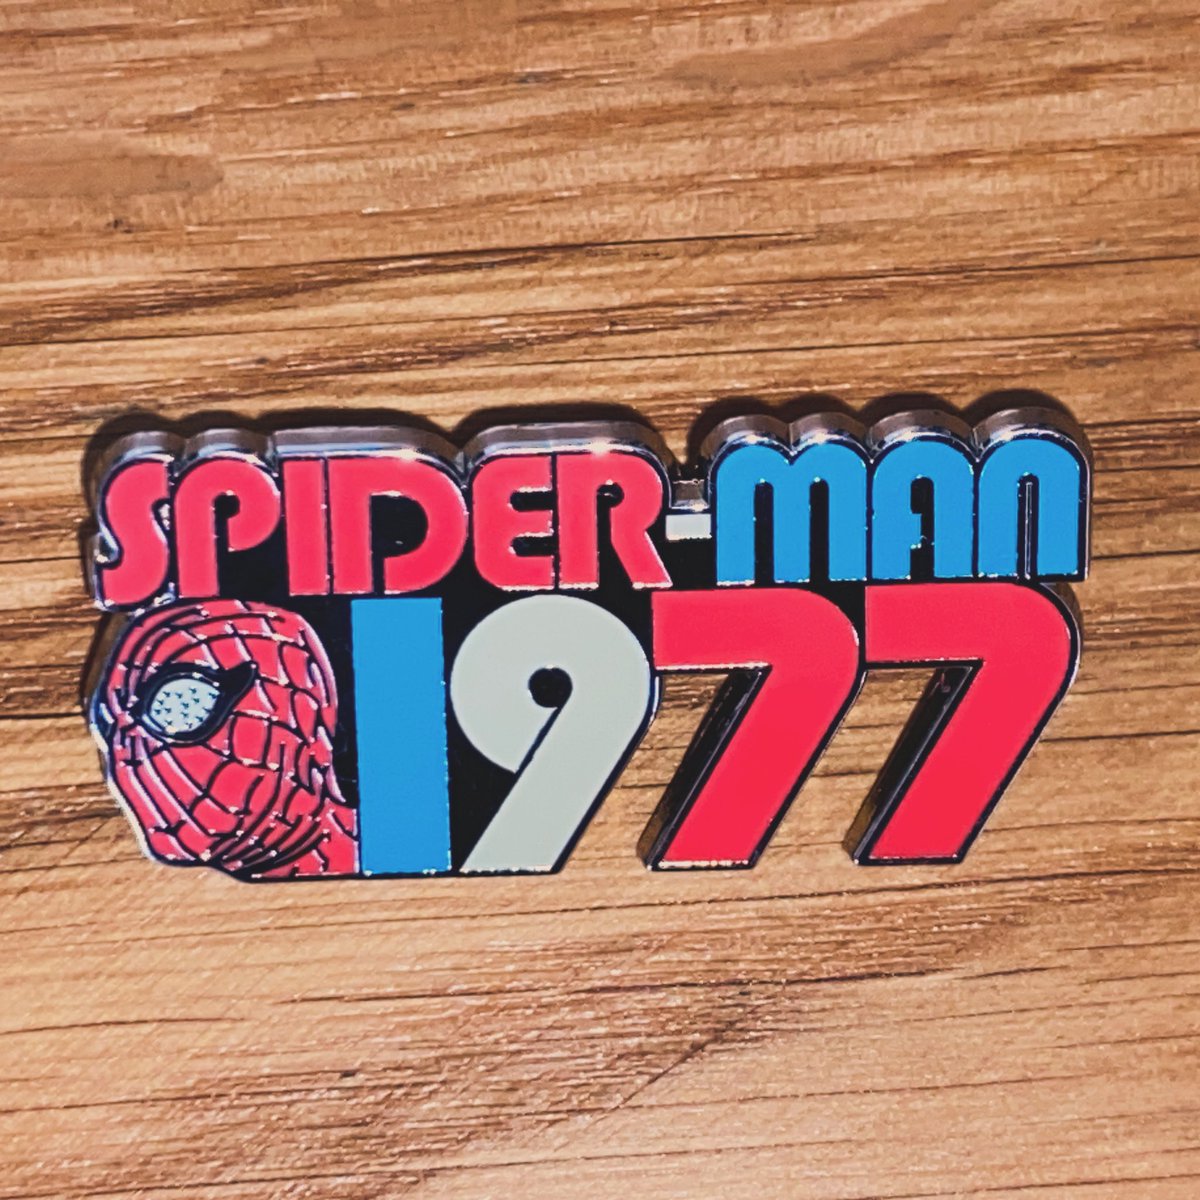 Has anyone picked up one of these metal pins from any of the Disney Parks? #spiderman #spiderman77 #1977 #spiderman1977 #nicholashammond